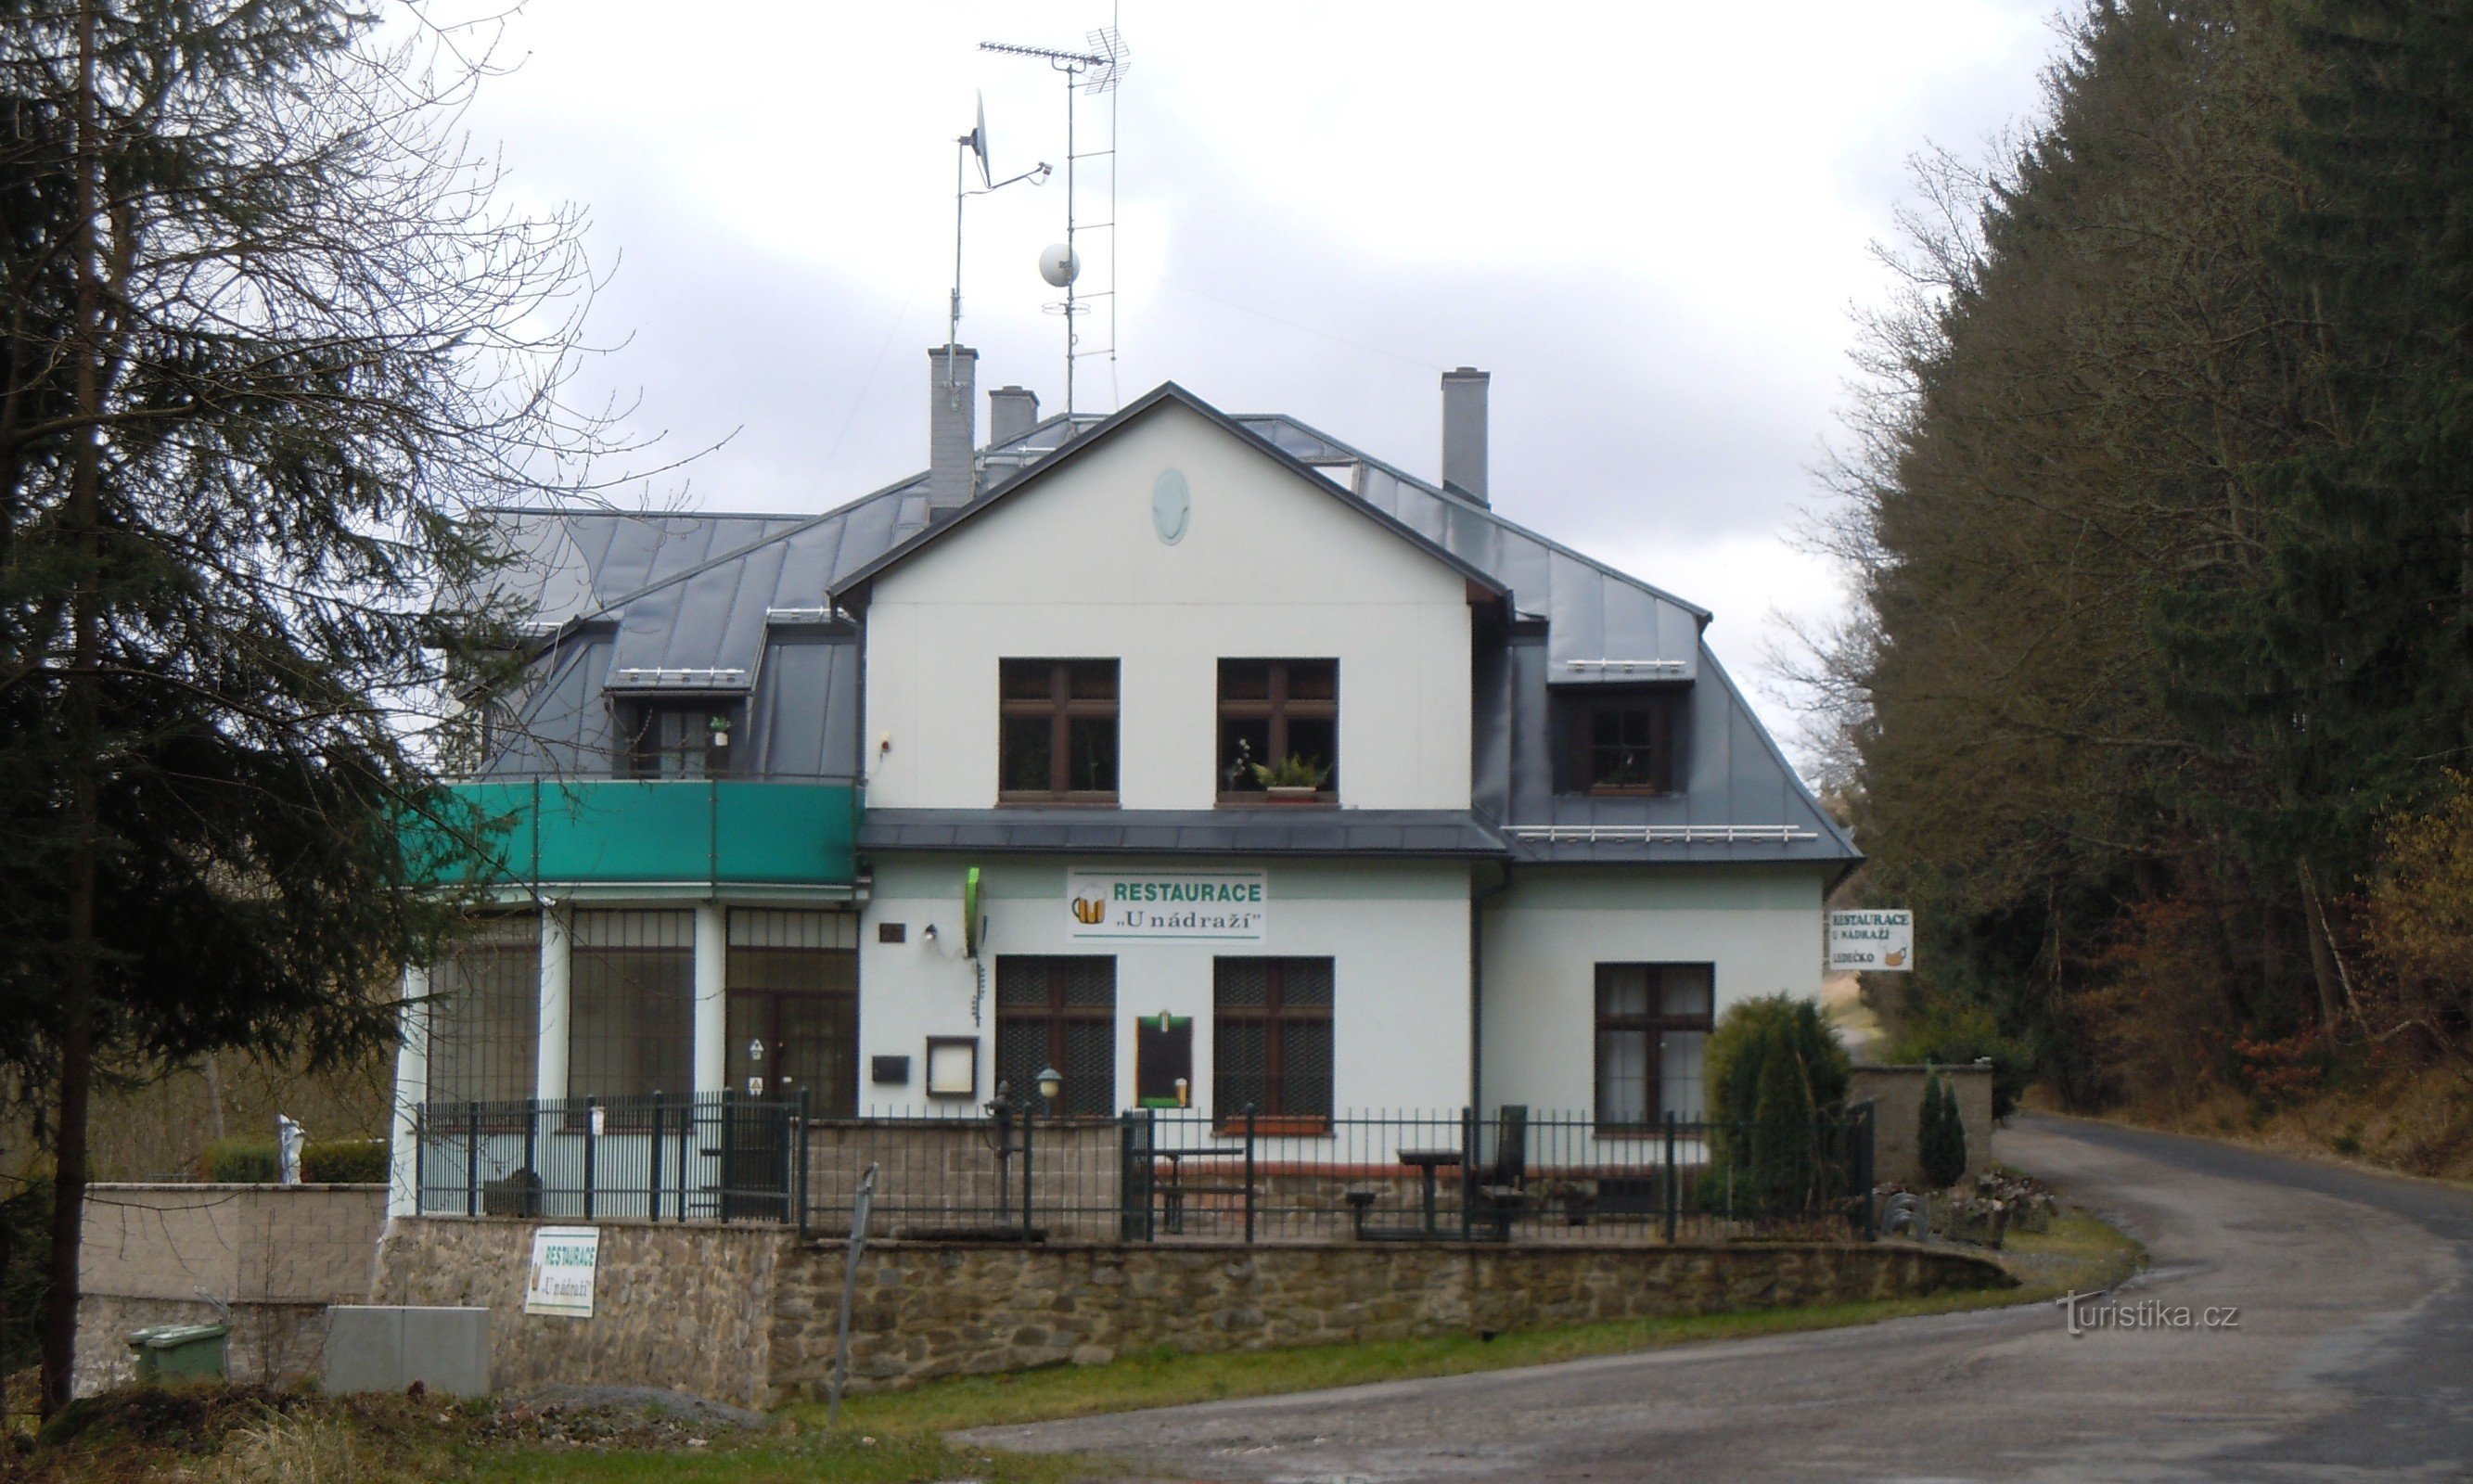 restaurant building by the station